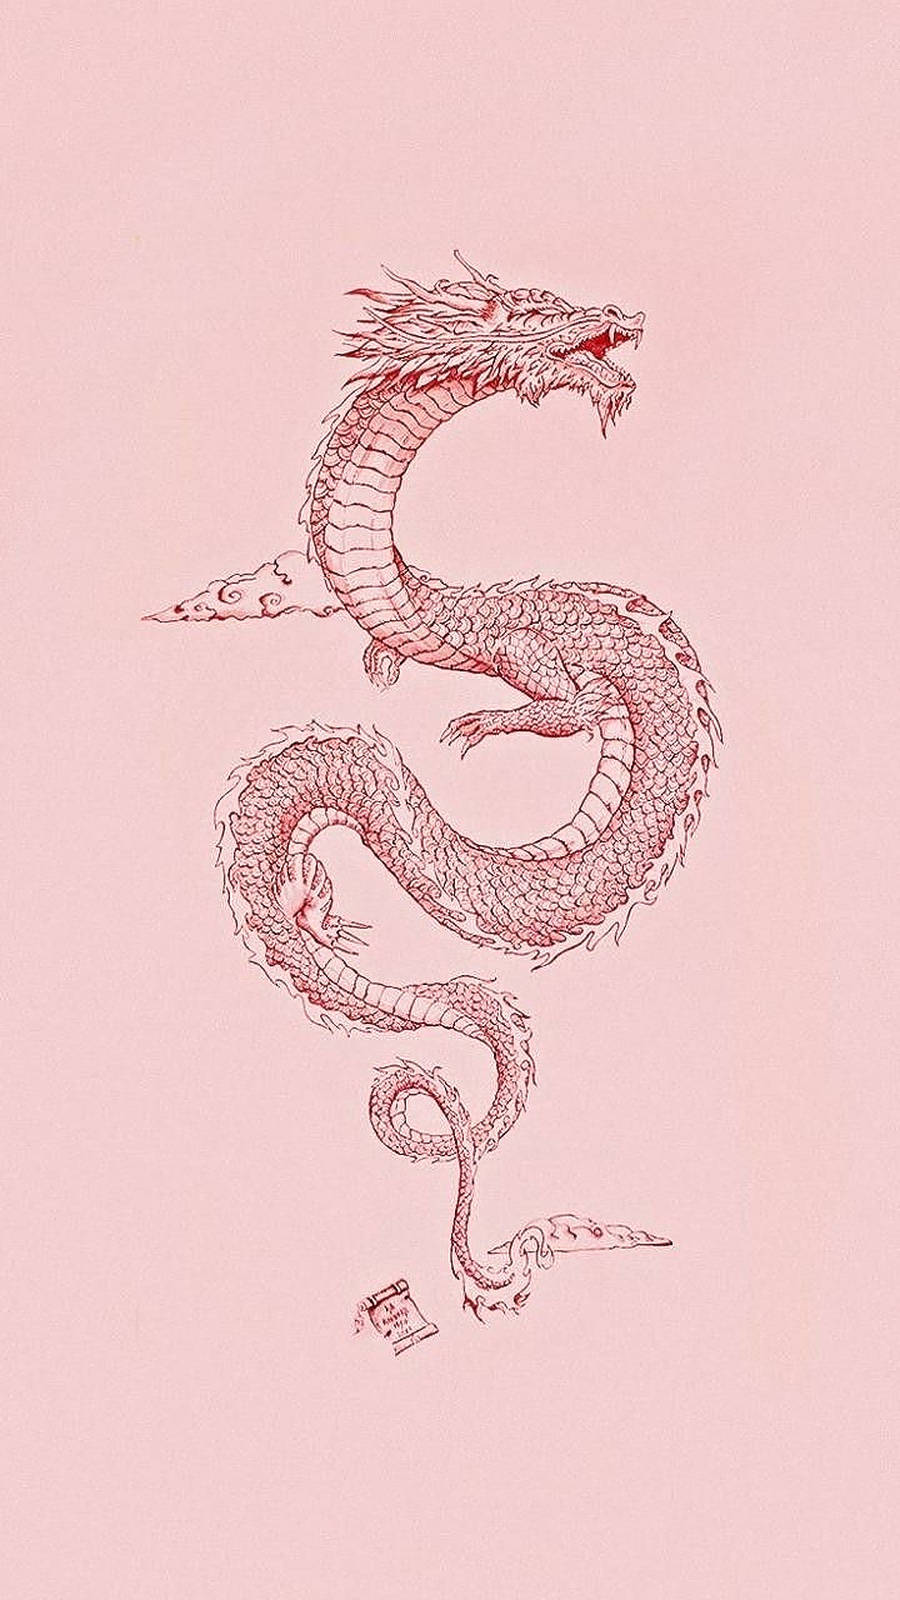 Red Sketched Japanese Dragon Tattoo Wallpaper